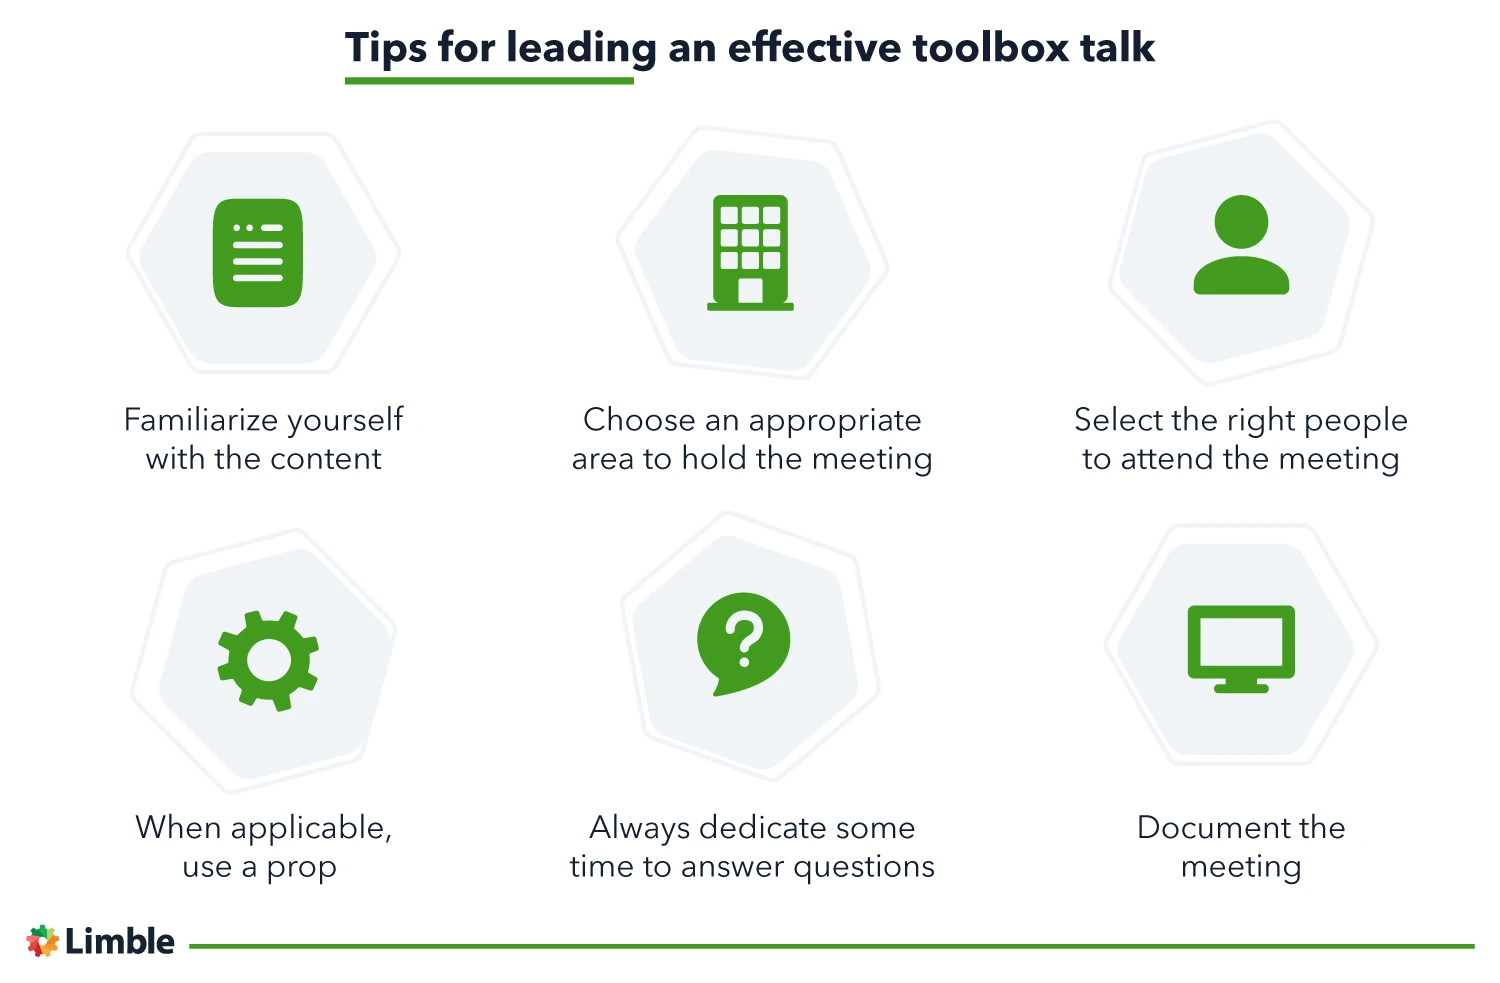 Tips for leading an effective toolbox talk